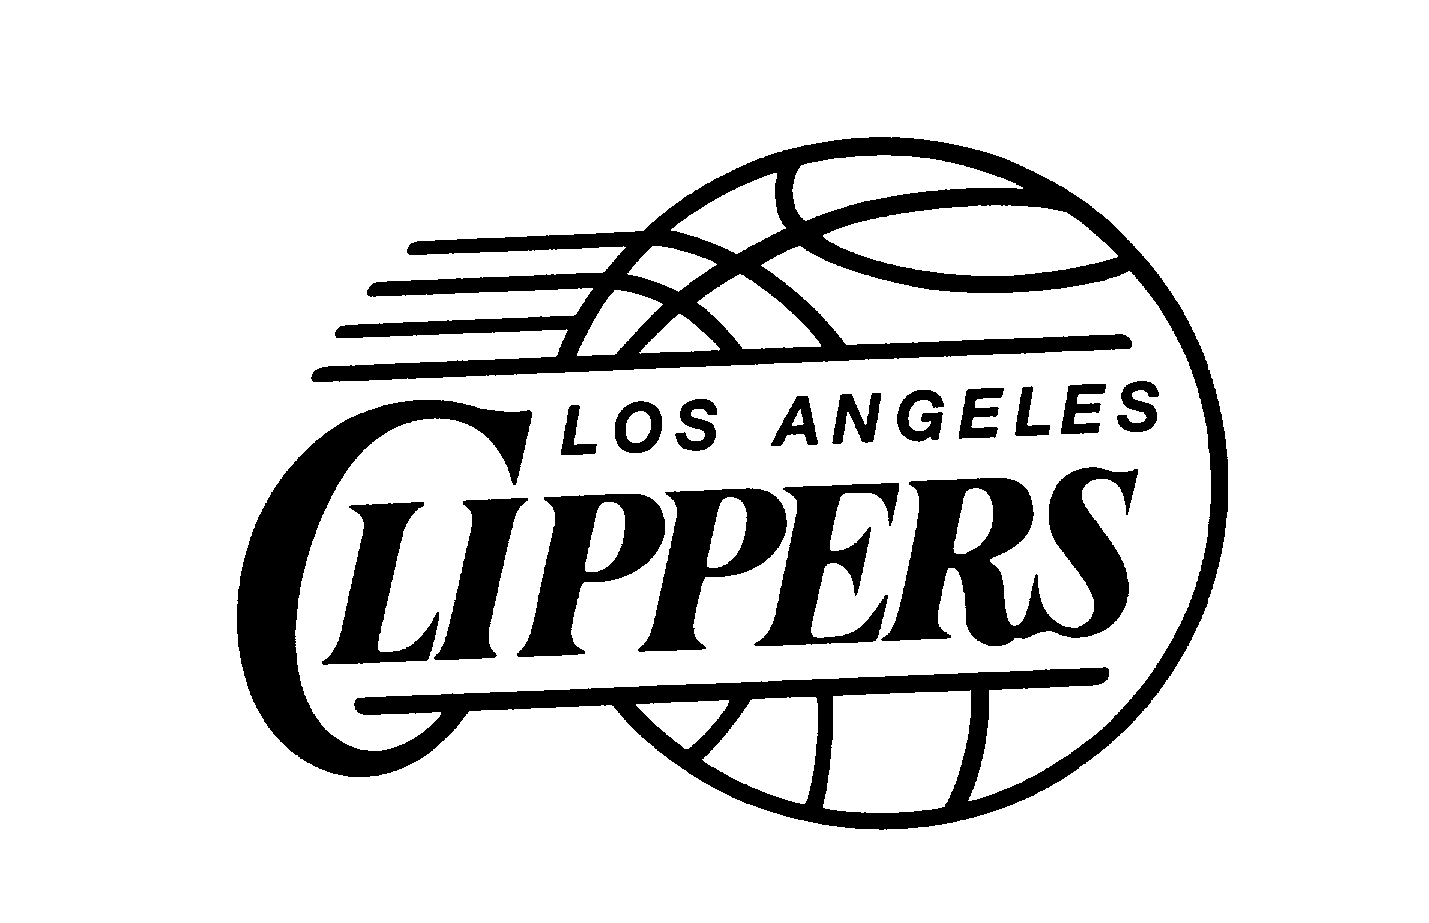  LOS ANGELES CLIPPERS